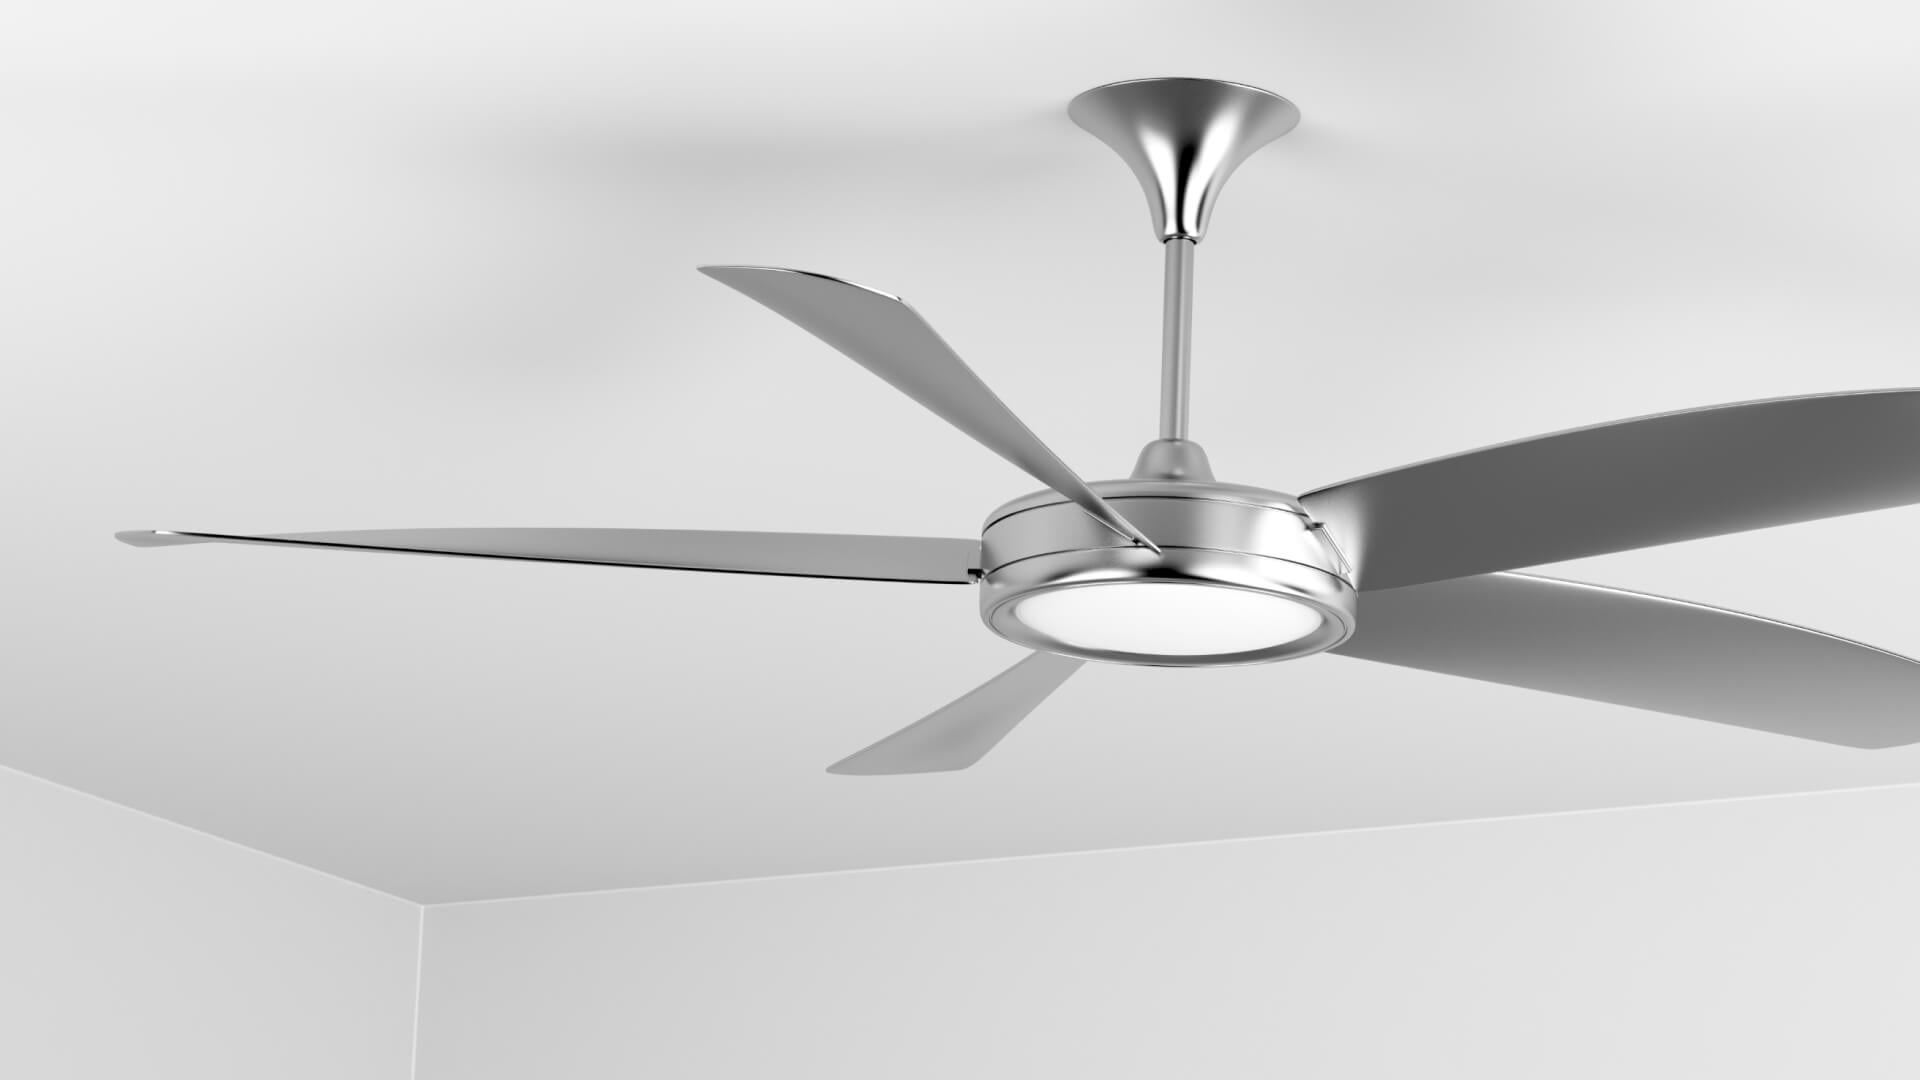 An image of a ceiling fan in a white room.